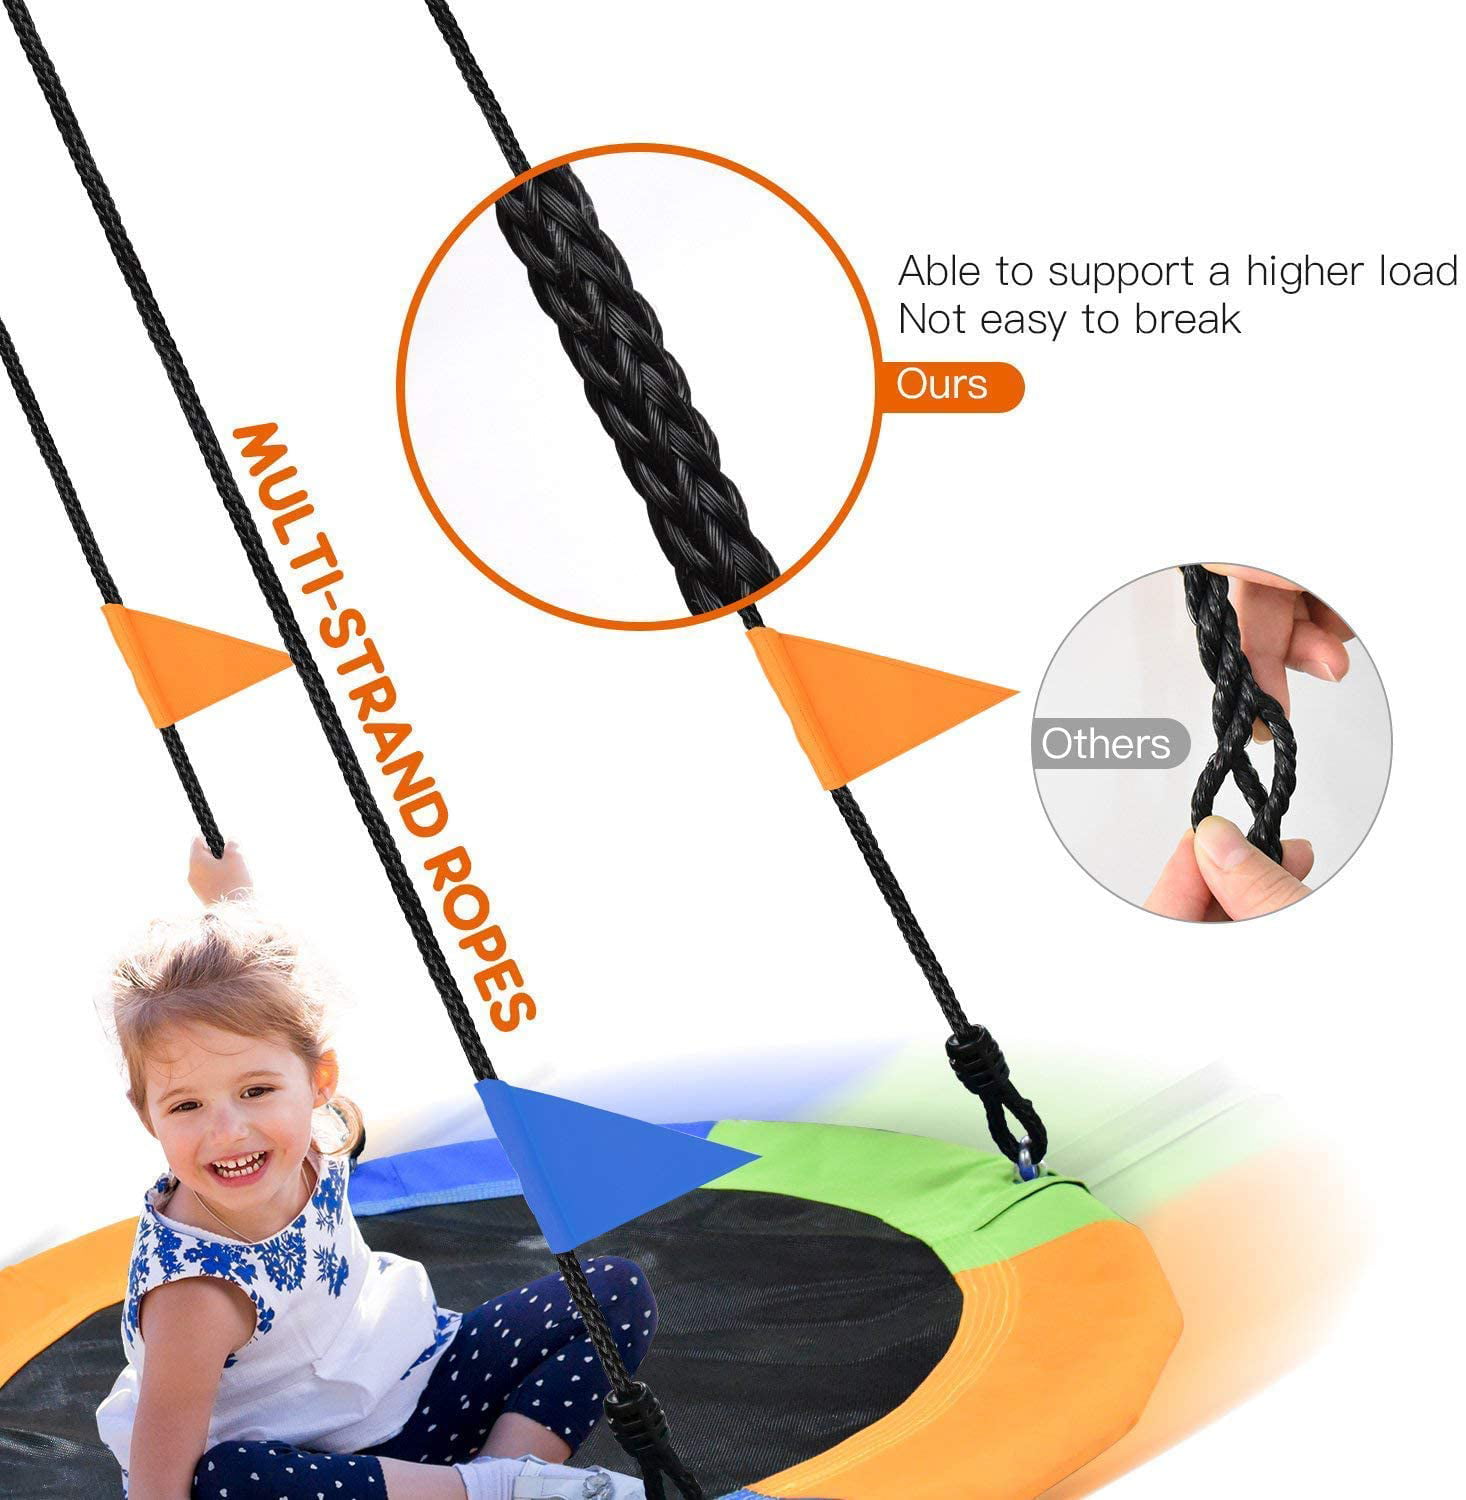 40 Inch Saucer Tree Swing Flying 700 lb Weight Capacity Adjustable Multi-Strand Ropes PVC Polyester Cover Colorful Safe and Durable Swing Seat for Children Adults 